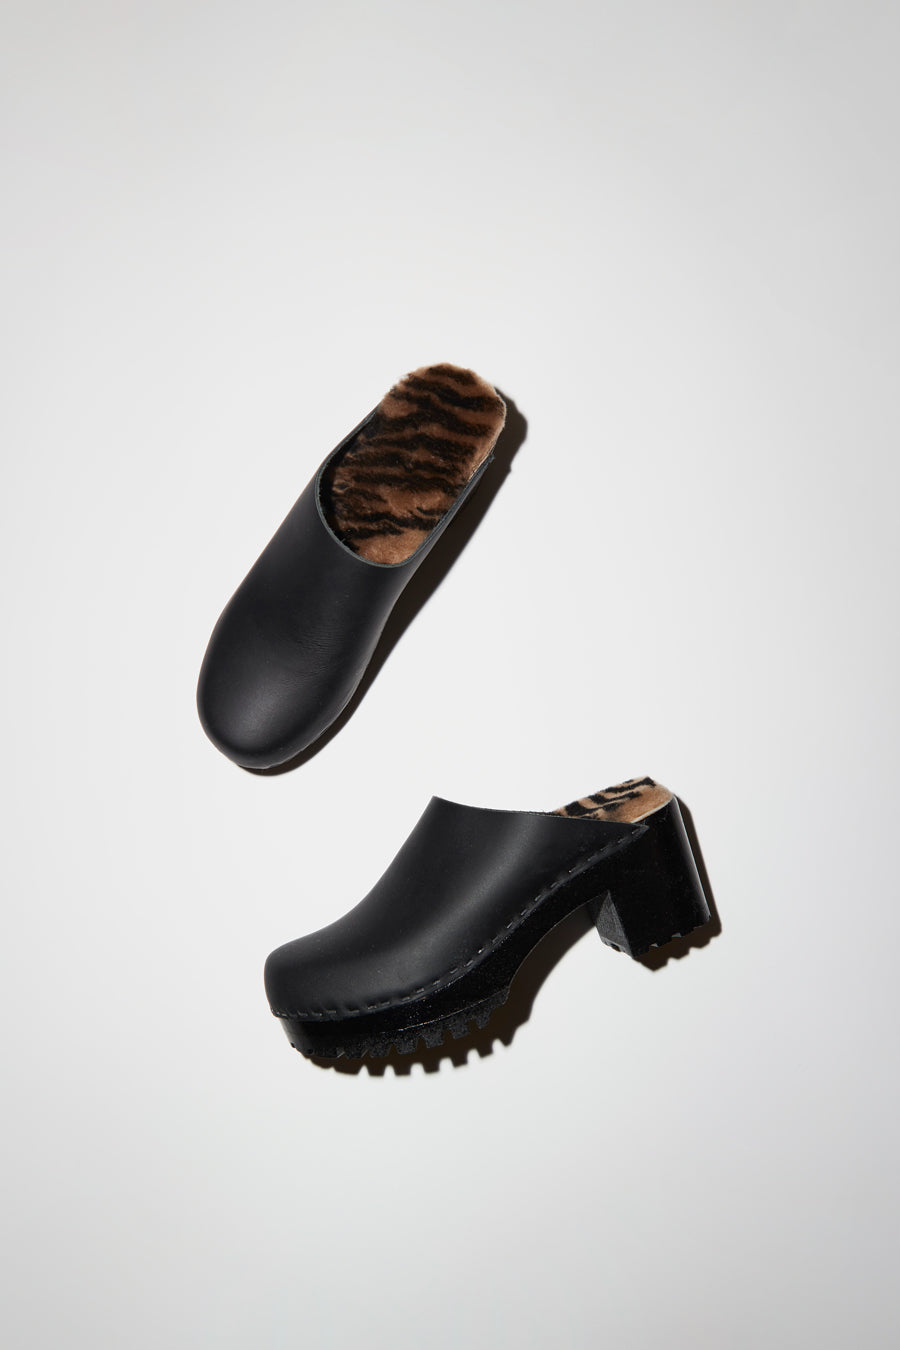 No.6 Liza Clog on Mid Tread in Black with Zebra Shearling on Black Base